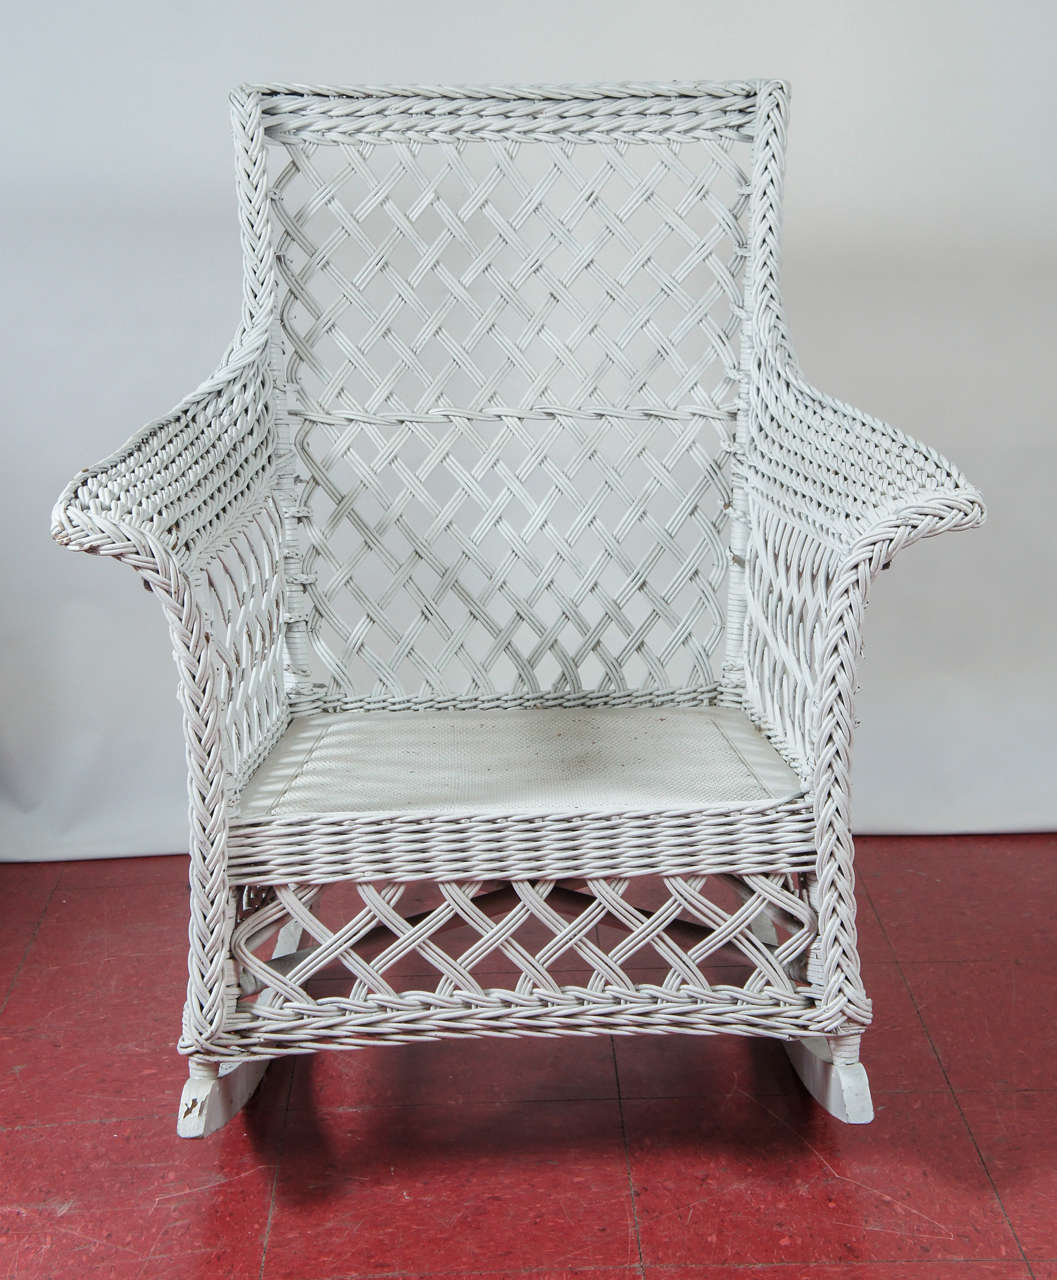 Split reed rattan rocking chair very well constructed with white basket and lattice weave. 23.5